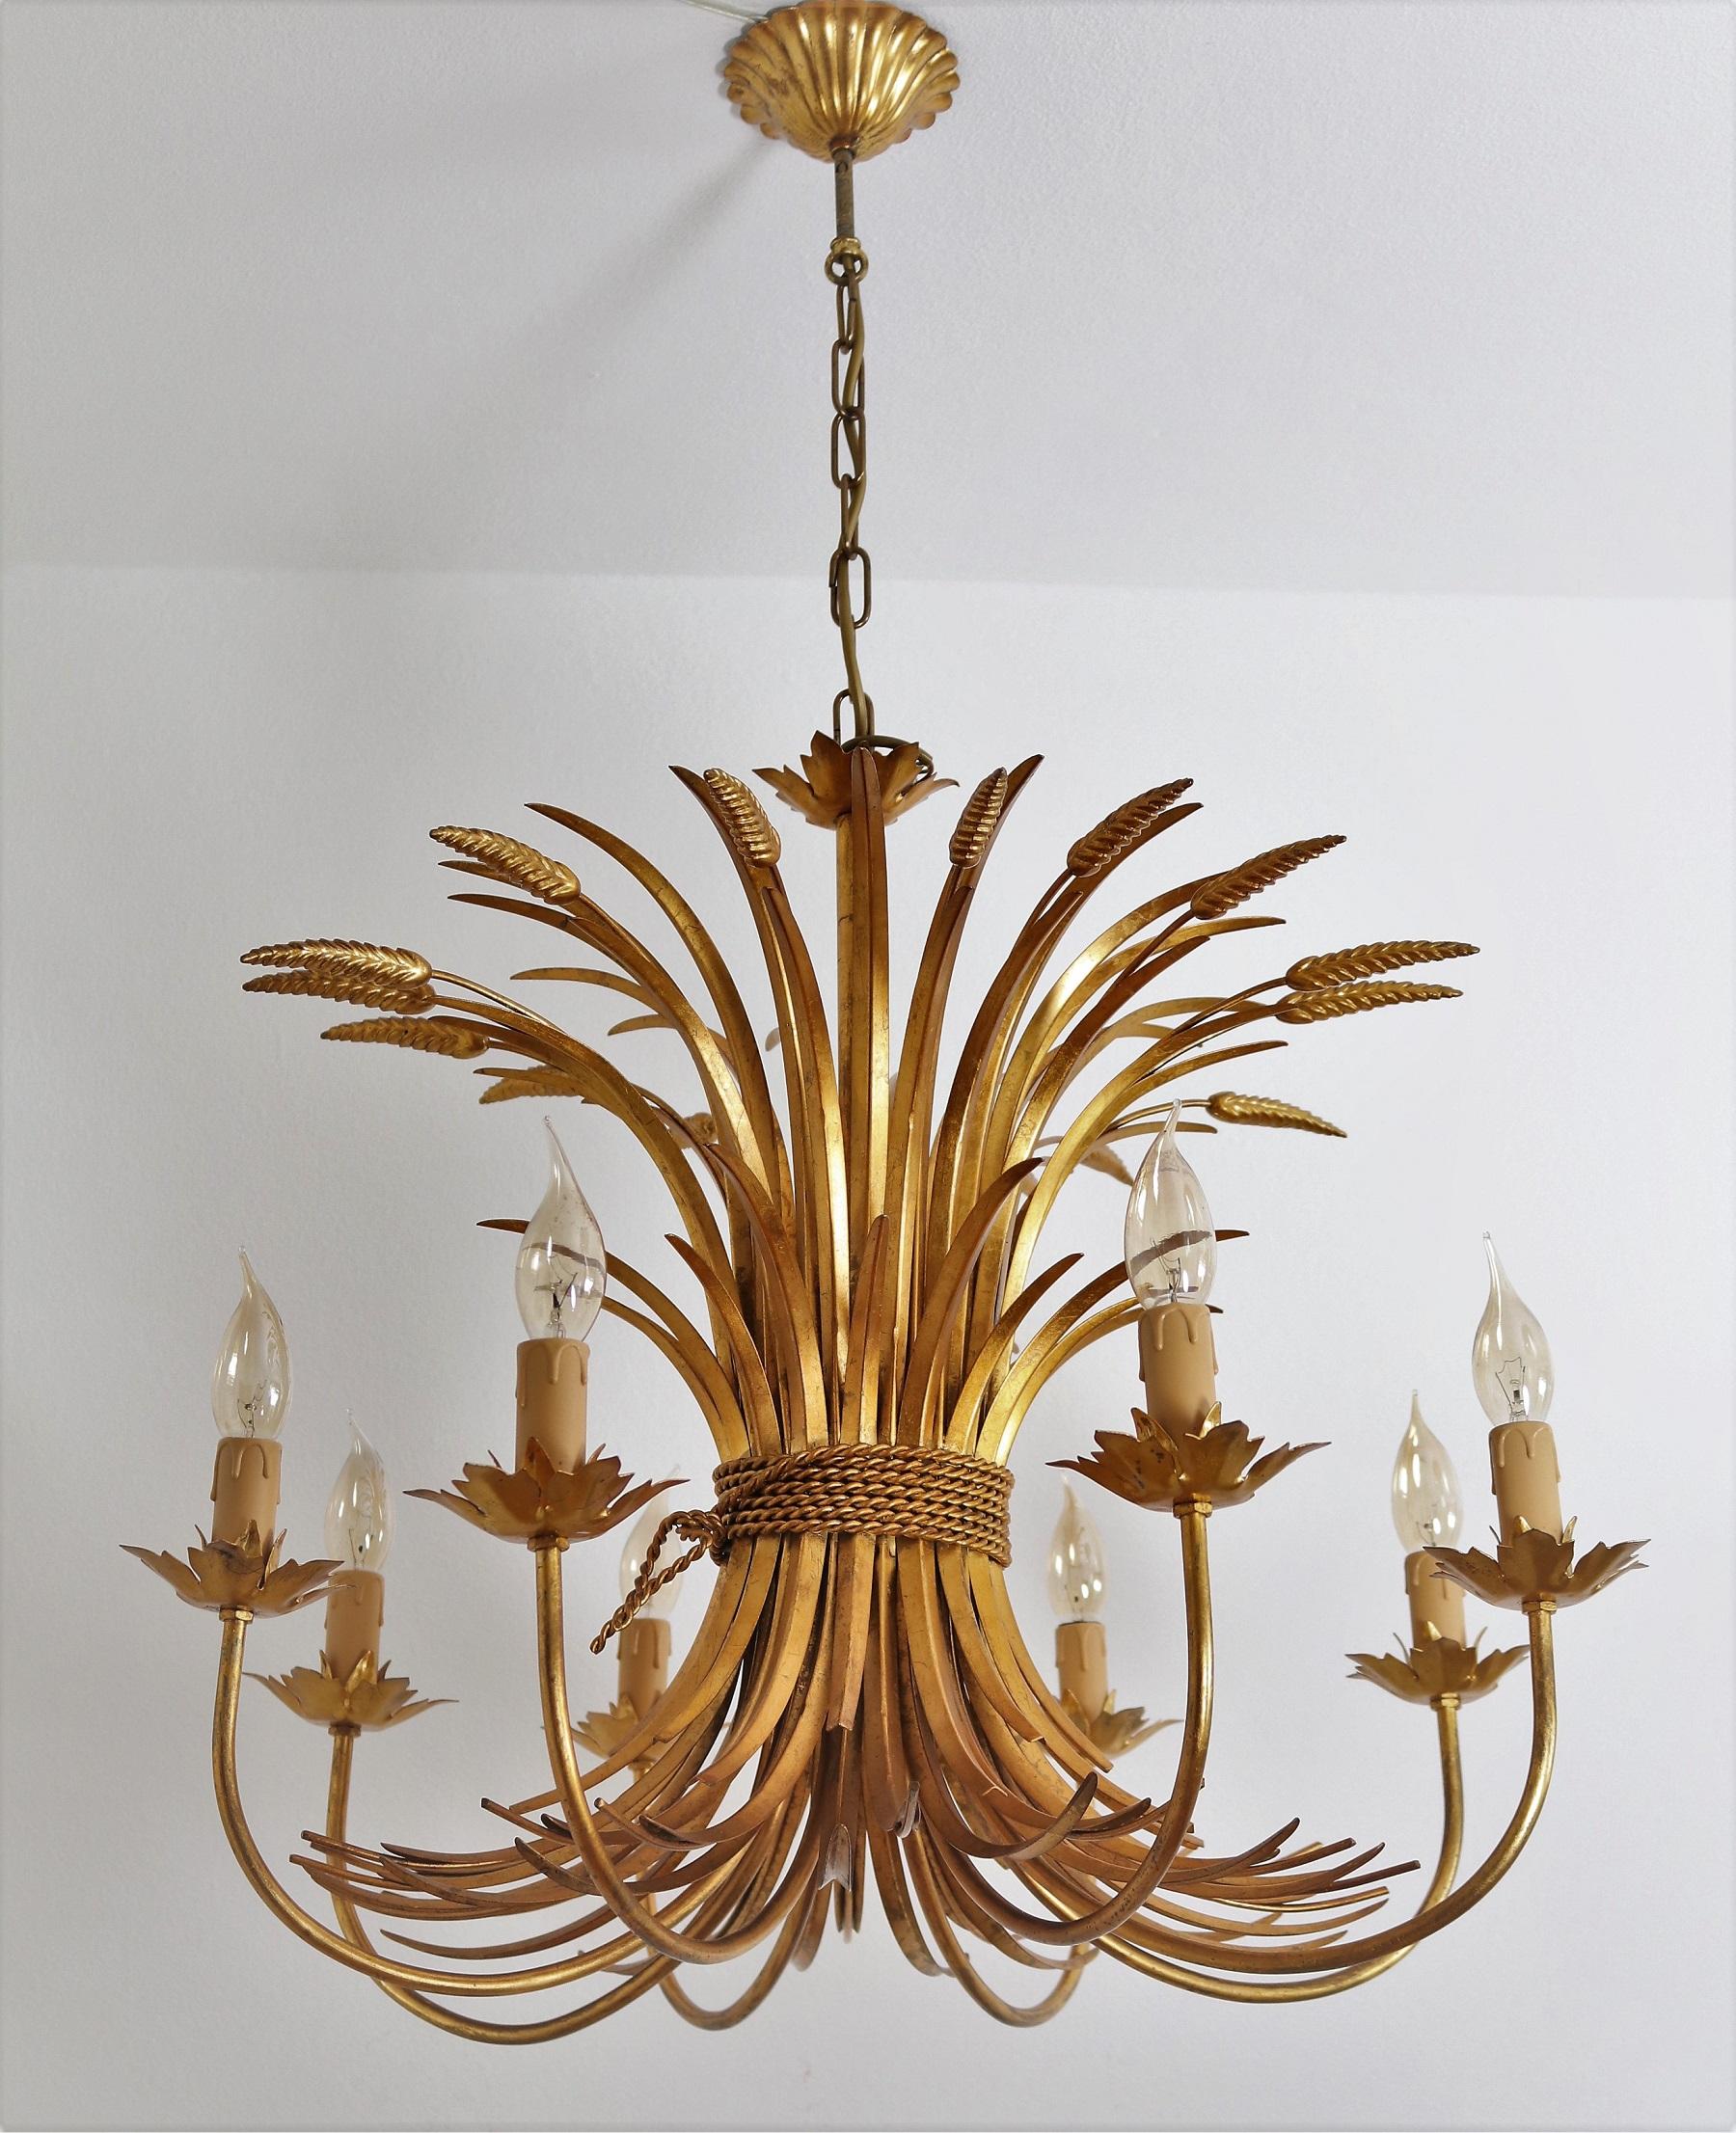 A large Hollywood Regency eight-arm light fixture from Italy manufactured in mid-century in between the 1960s-1970s. Fits with the interior style from Coco Chanel.
The chandelier has the shape of a bunch of wheat sheafs spread out upwards and eight